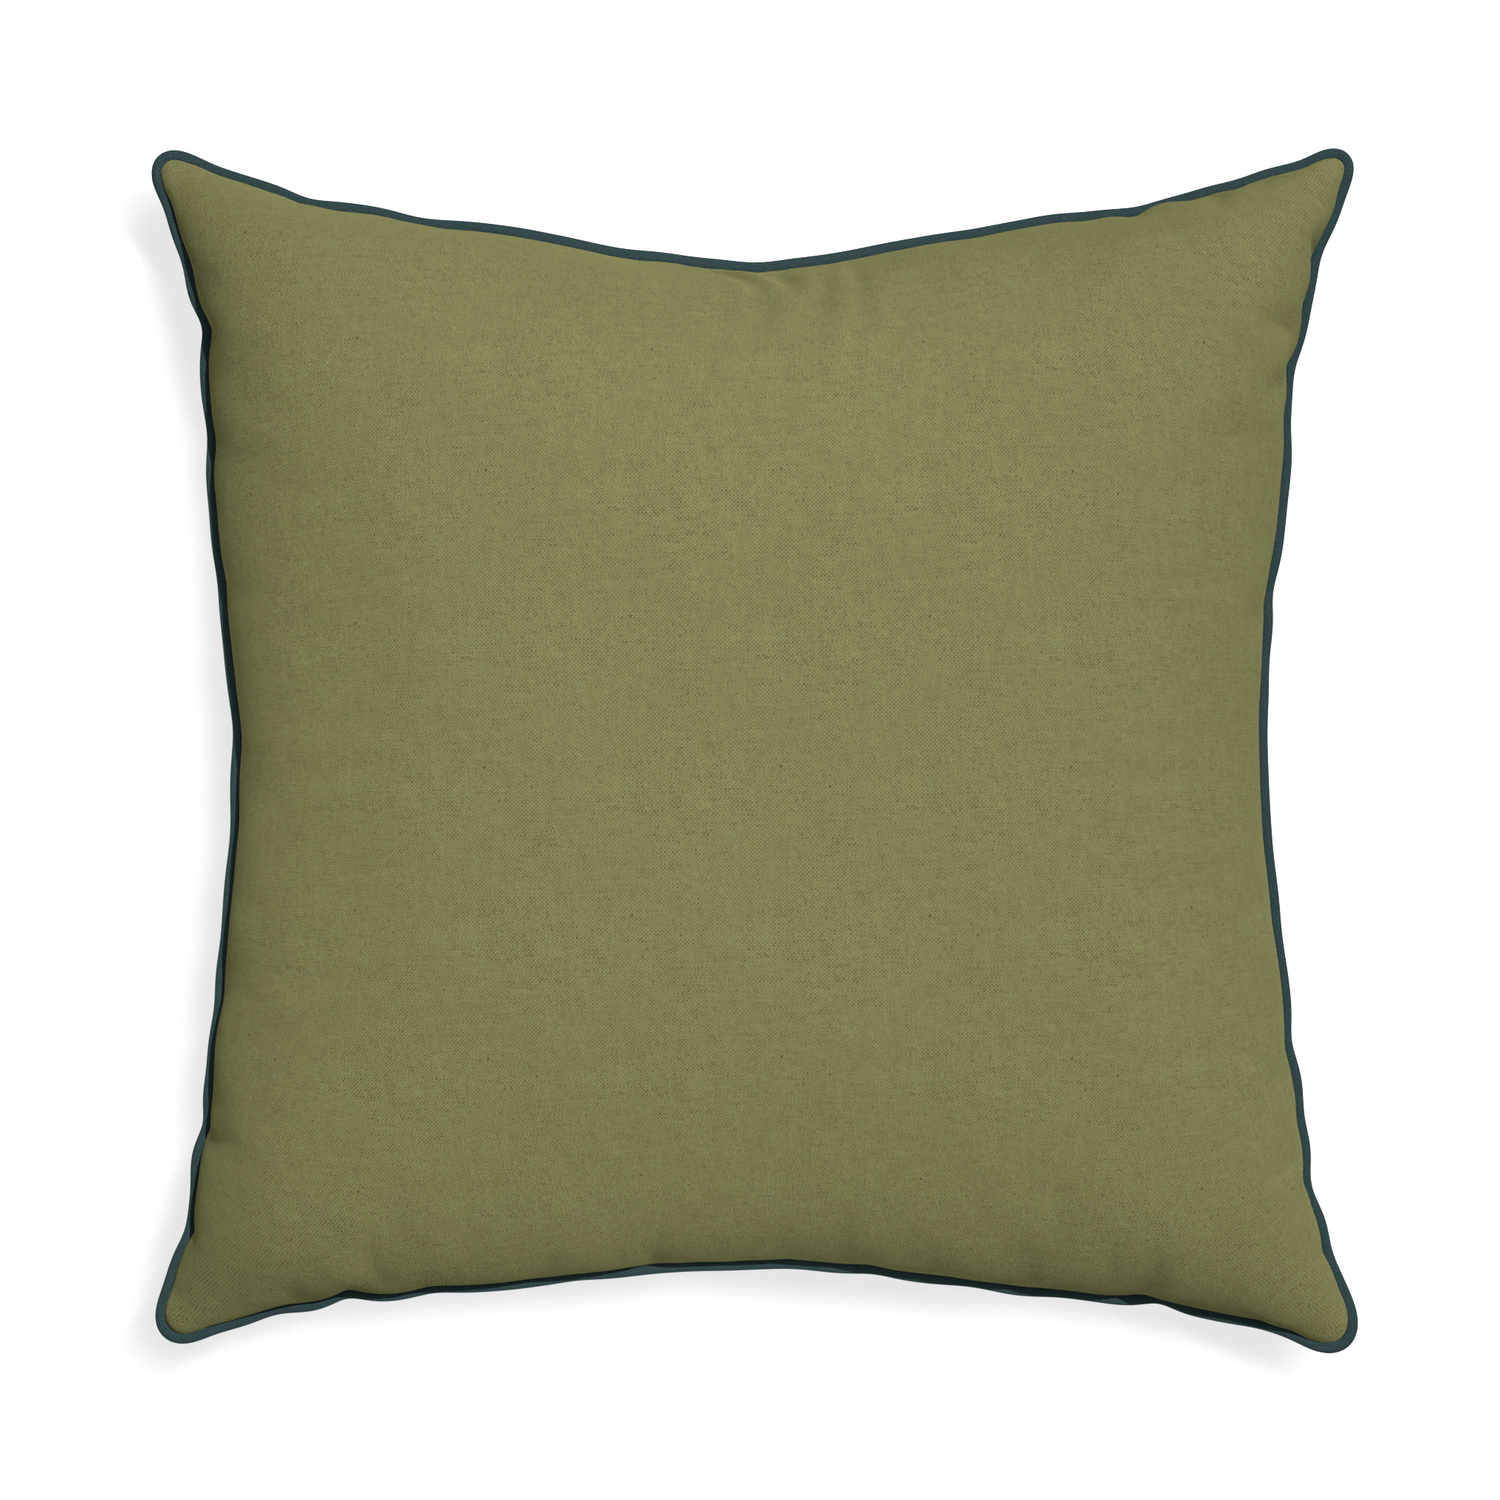 Euro-sham moss custom moss greenpillow with p piping on white background